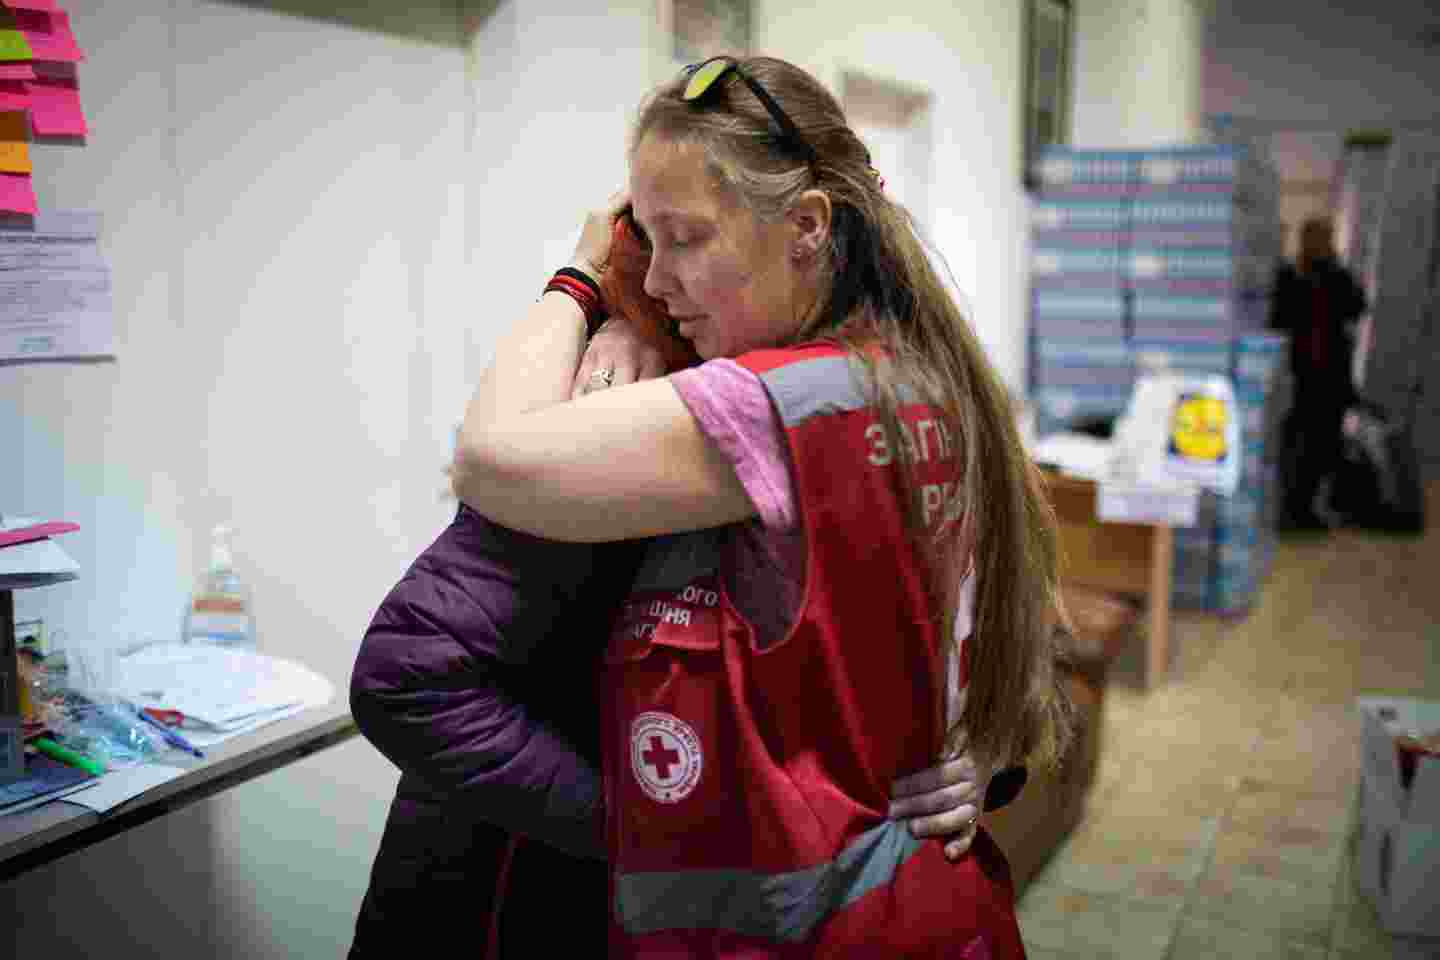 A person wearing Red Cross clothing hugging another person.